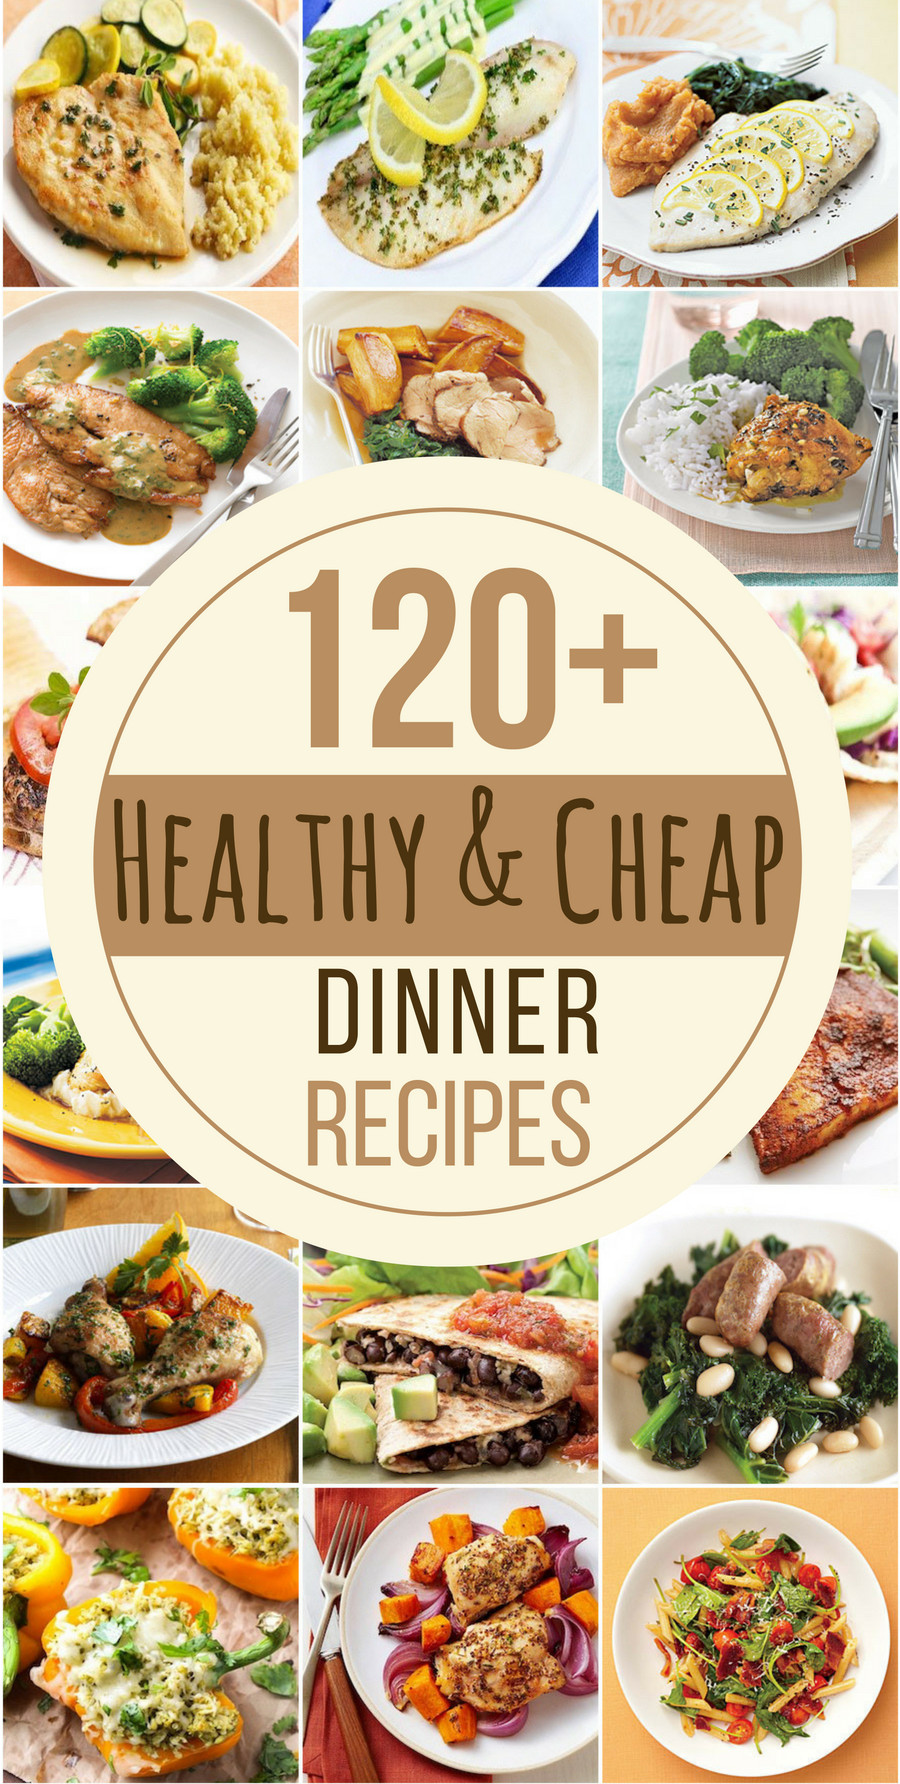 Healthy Cheap Dinner Ideas
 120 Healthy and Cheap Dinner Recipes Prudent Penny Pincher